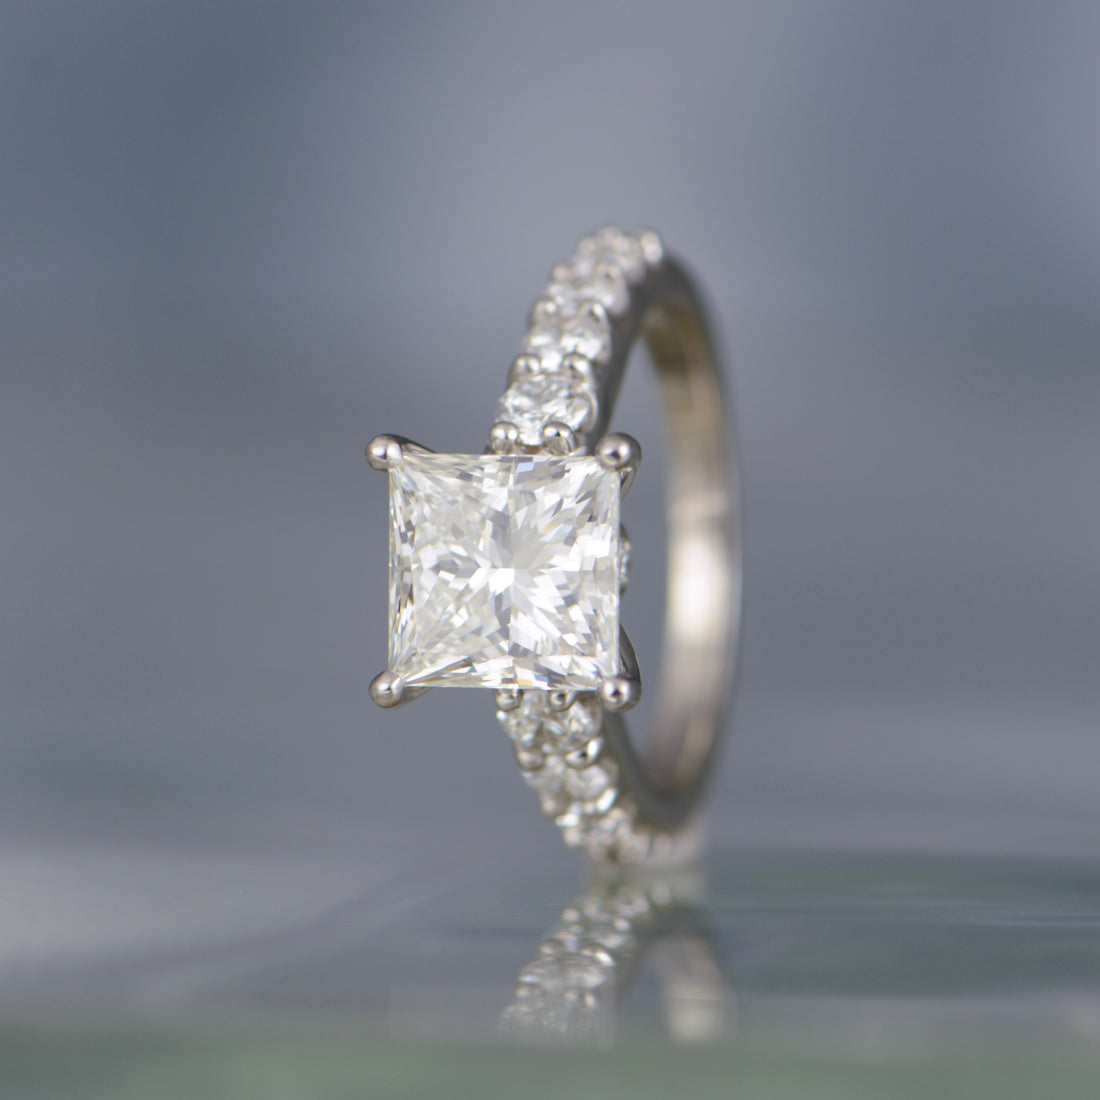 What you can do to safeguard your jewelry from loss or damage.